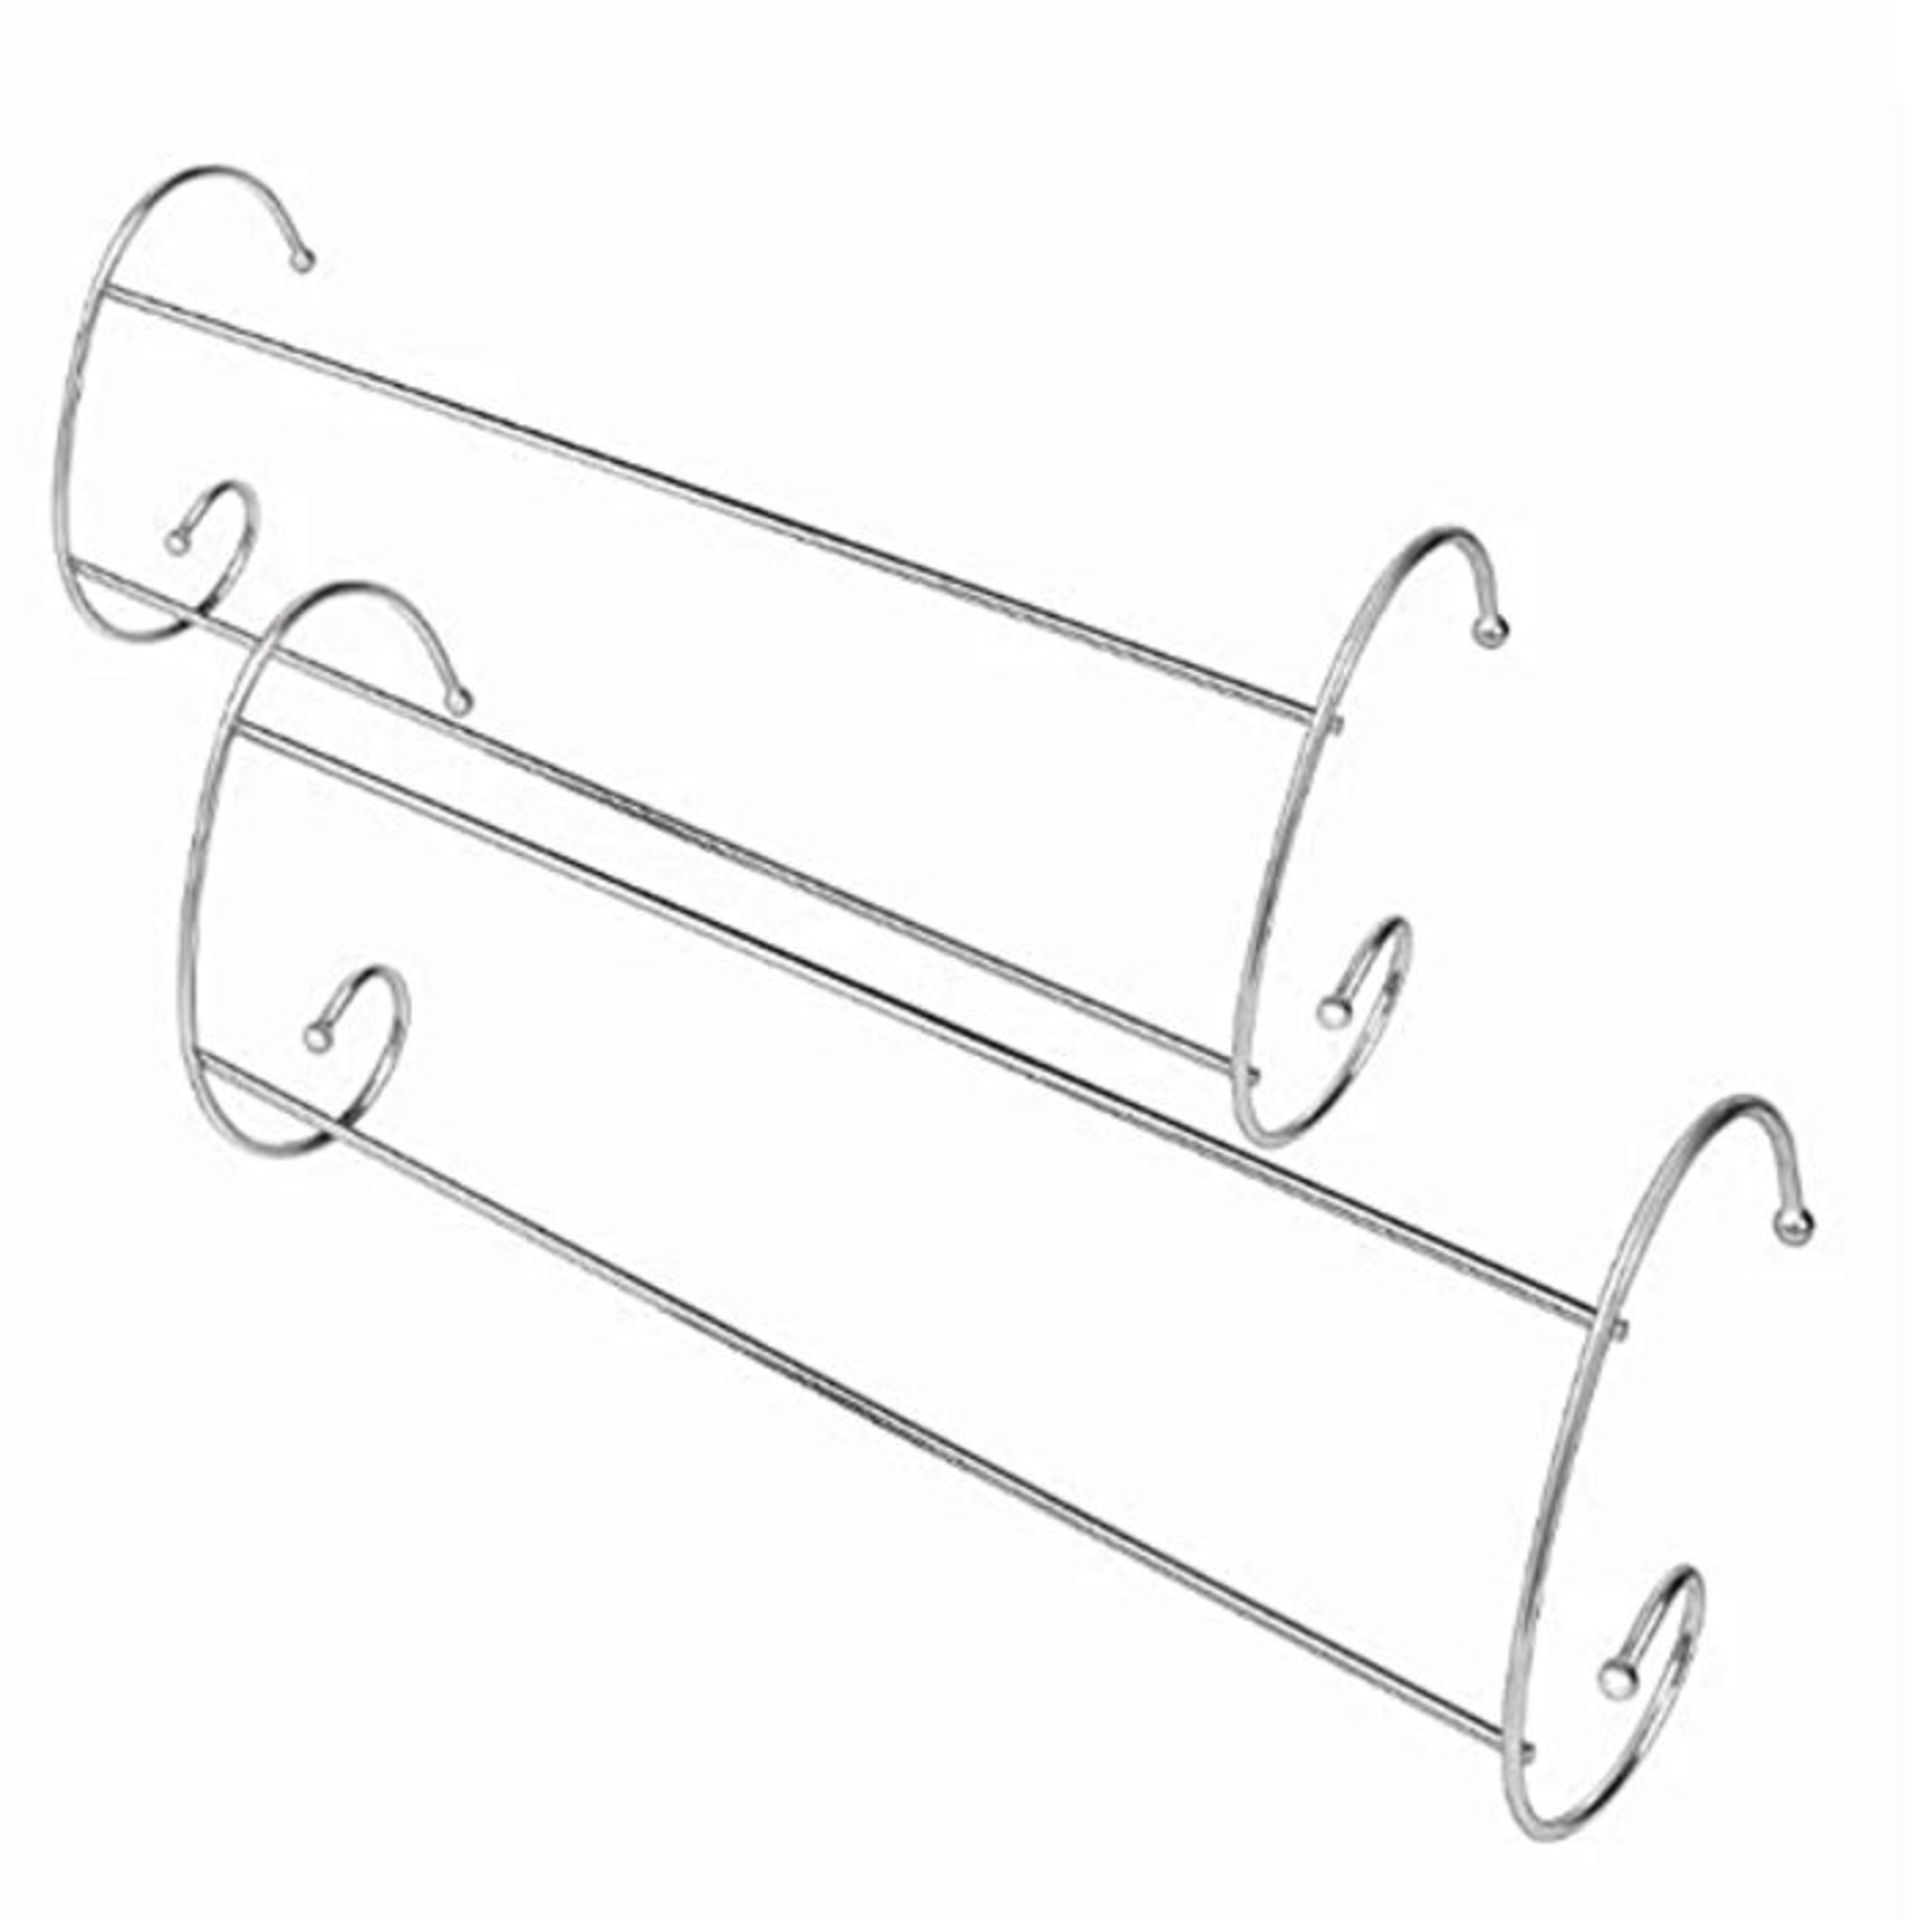 [CRACKED] Addis 509138 Radiator Airer, Pack of 2, Metal, 2m, 15 metres